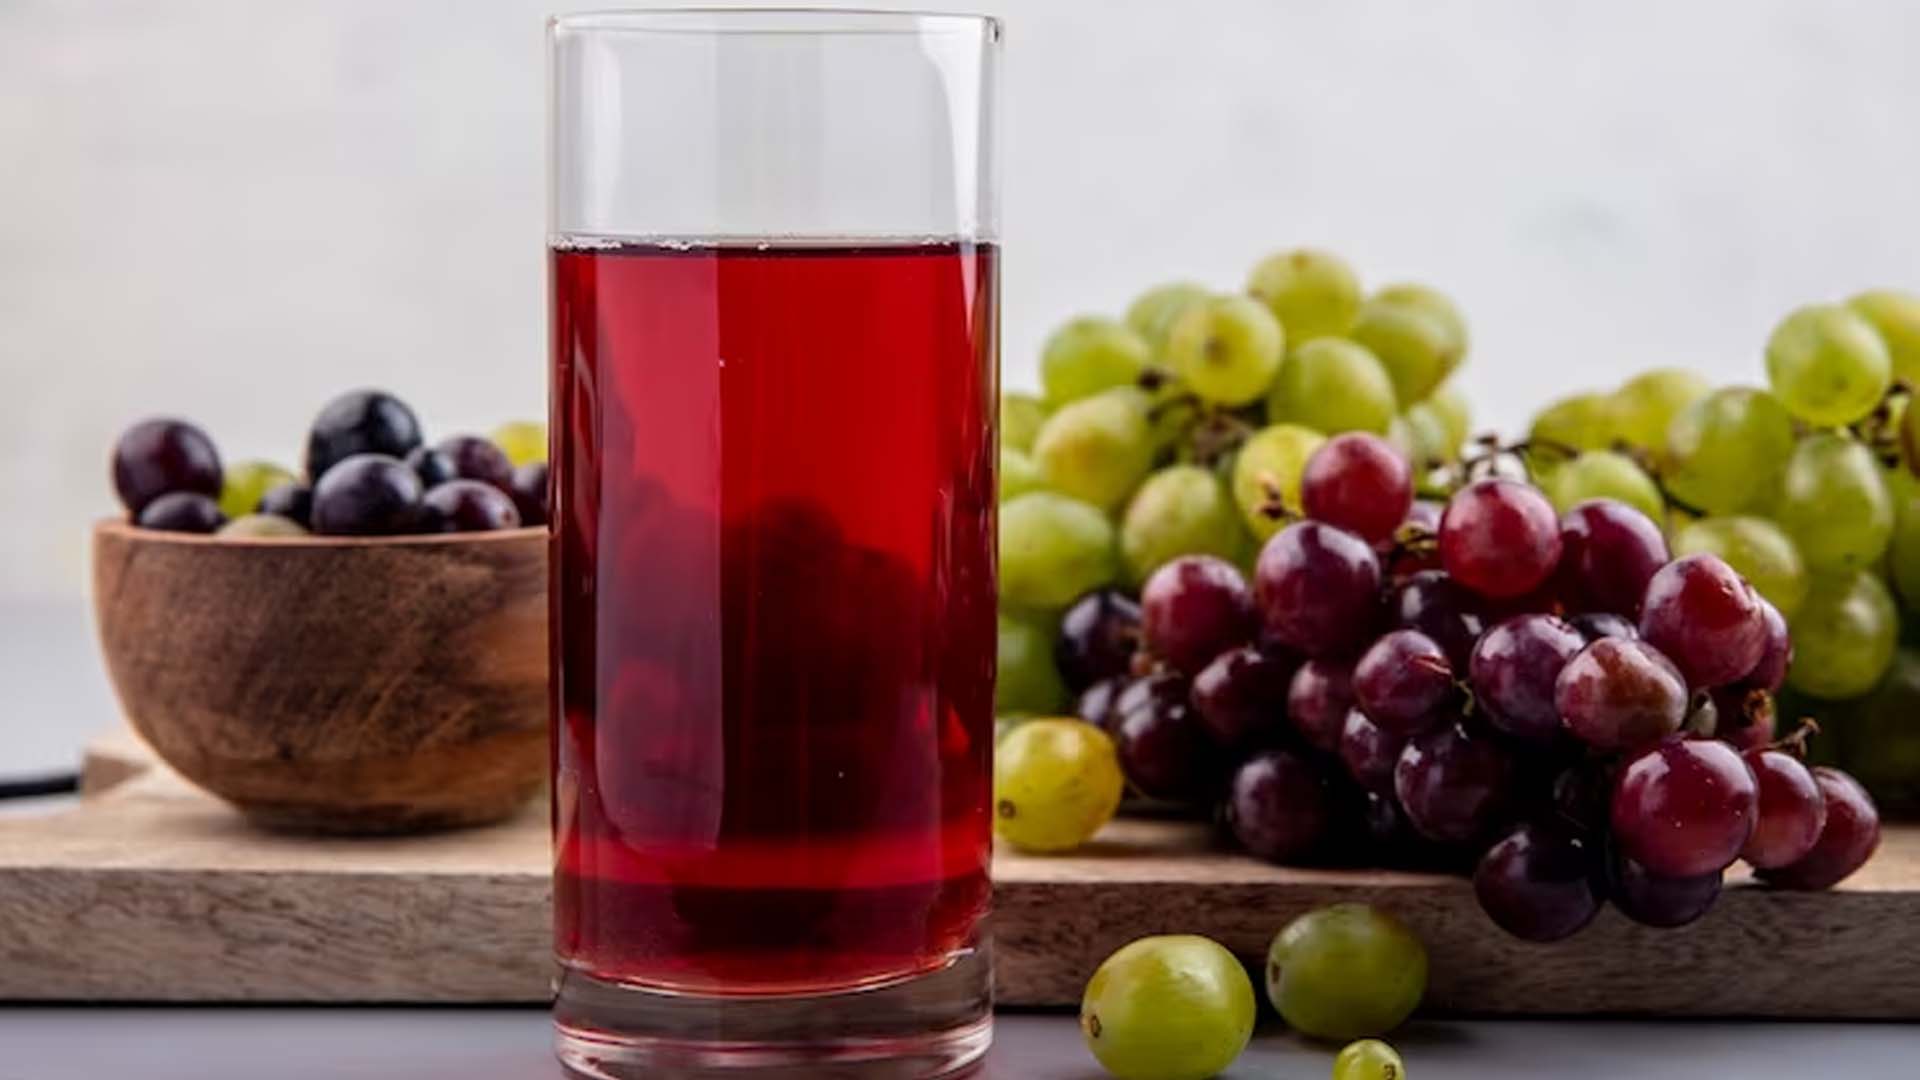 Does Grape Juice have the Same Health Benefits as Wine?